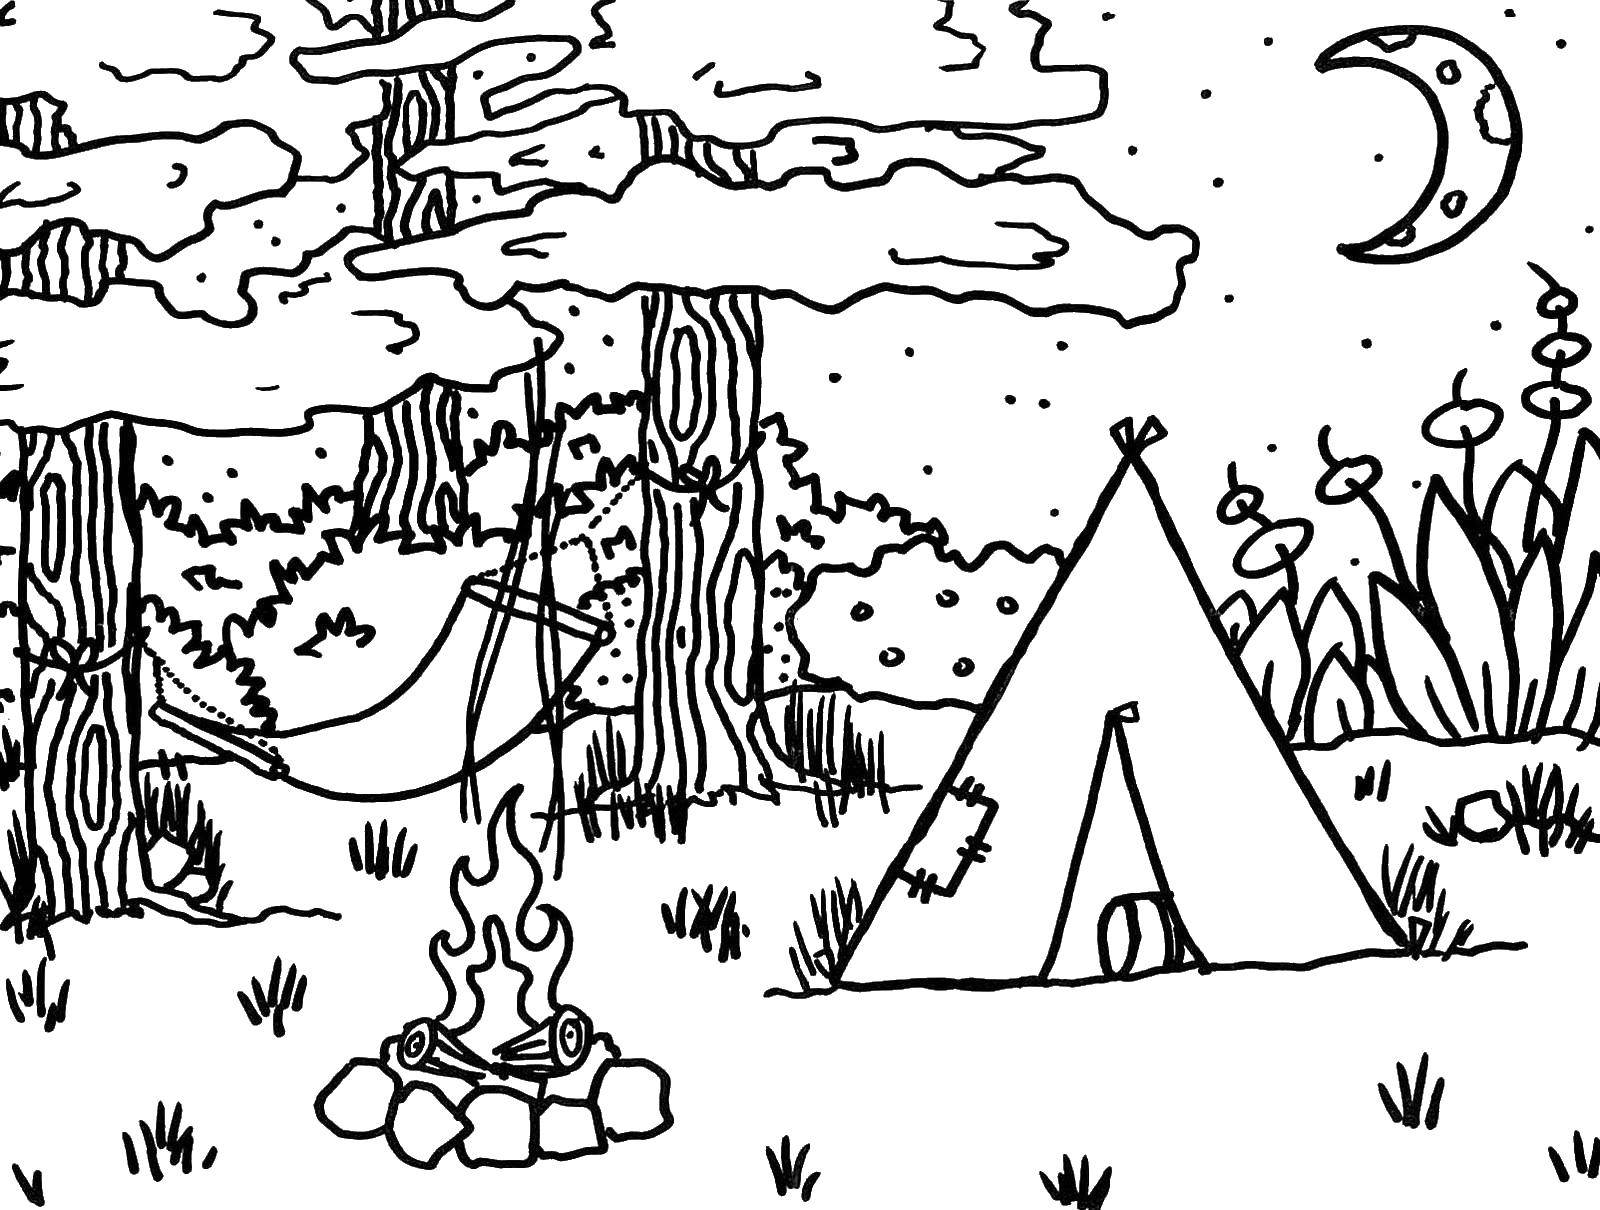 Coloring The camp fire. Category Camping. Tags:  Rest, hammock, tent.